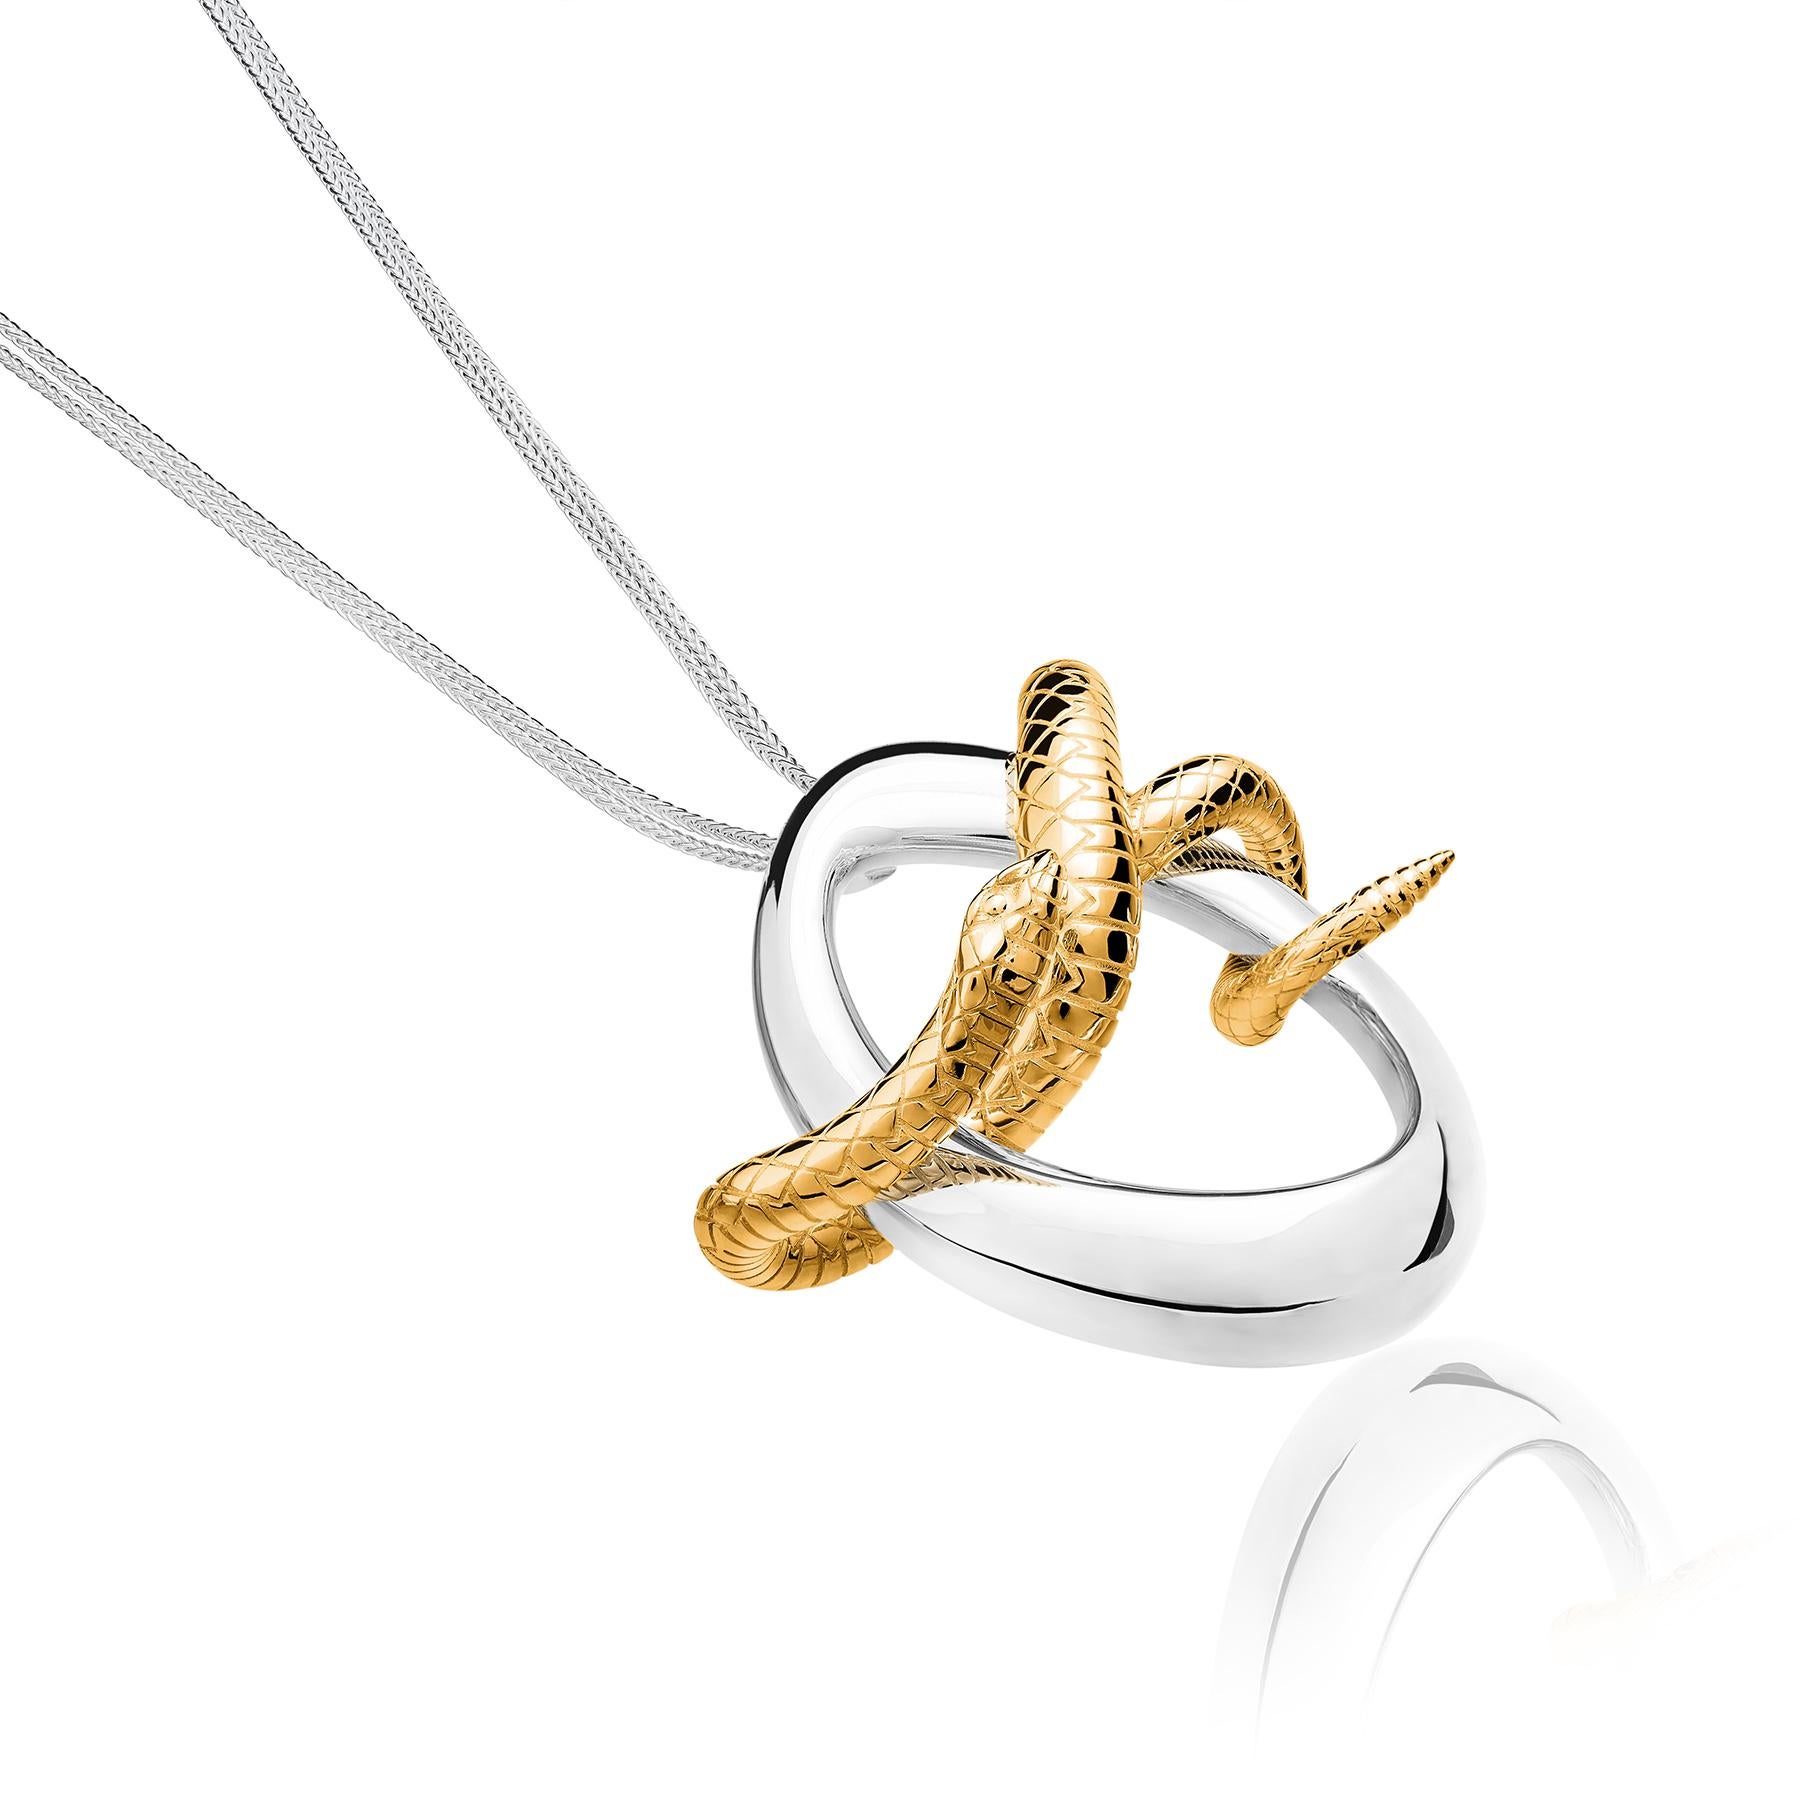 The Serpiente Vermeil Pendant  from the Animales Collection by TANE is made in sterling silver. Suspended from a chain of 31.4”, there is an irregular link designed for the collection, inspired by nature. Through this link, a Serpent is wound